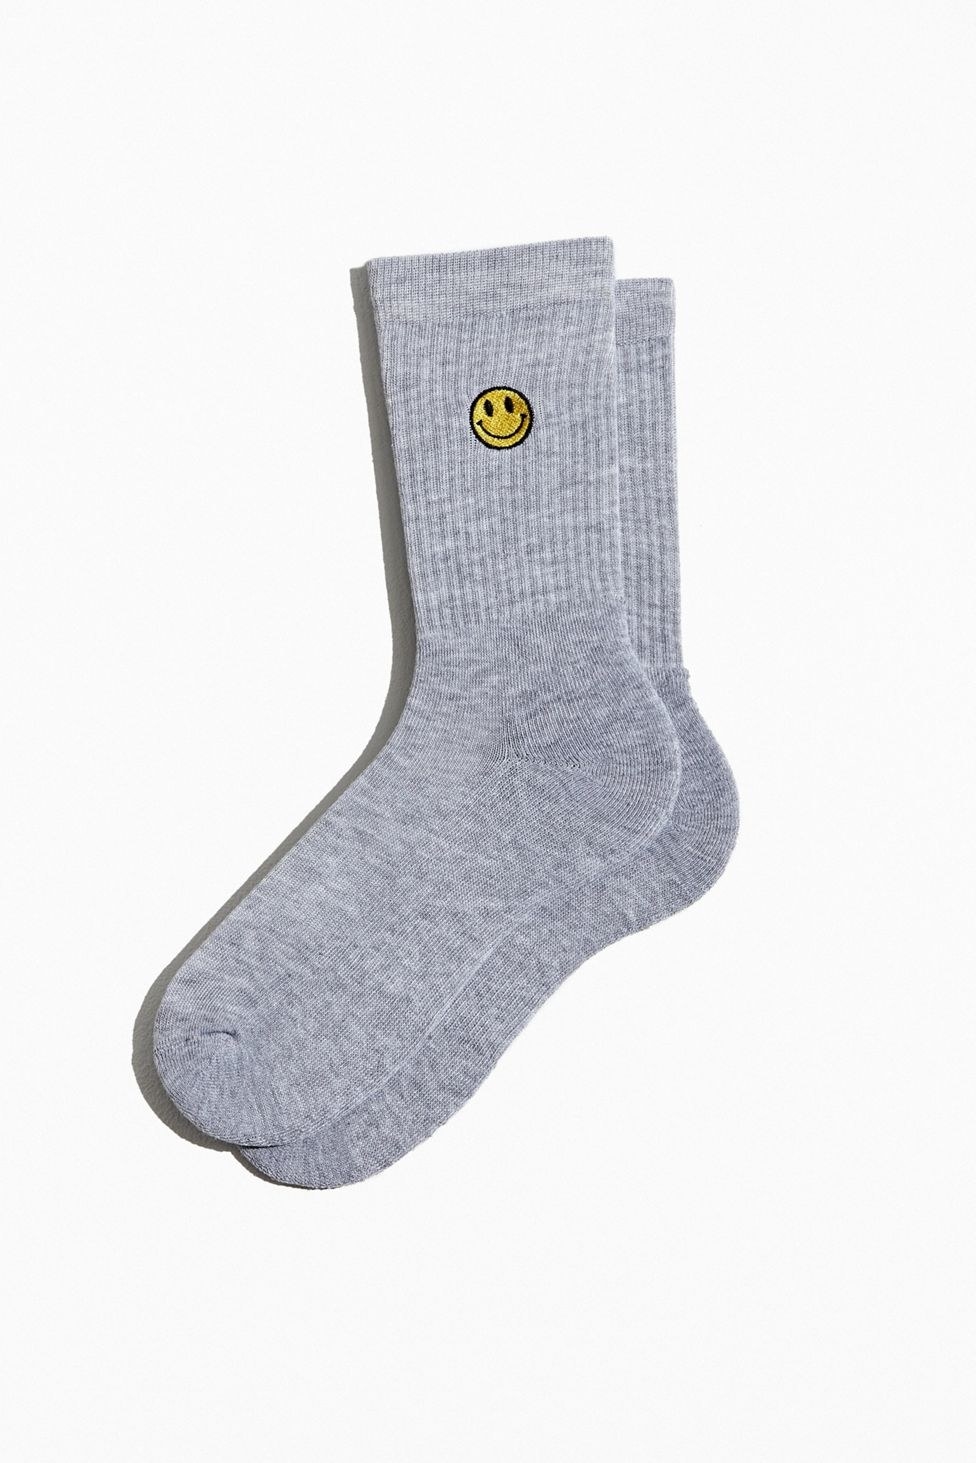 grey crew socks with an embroidered smiley face on the ankle